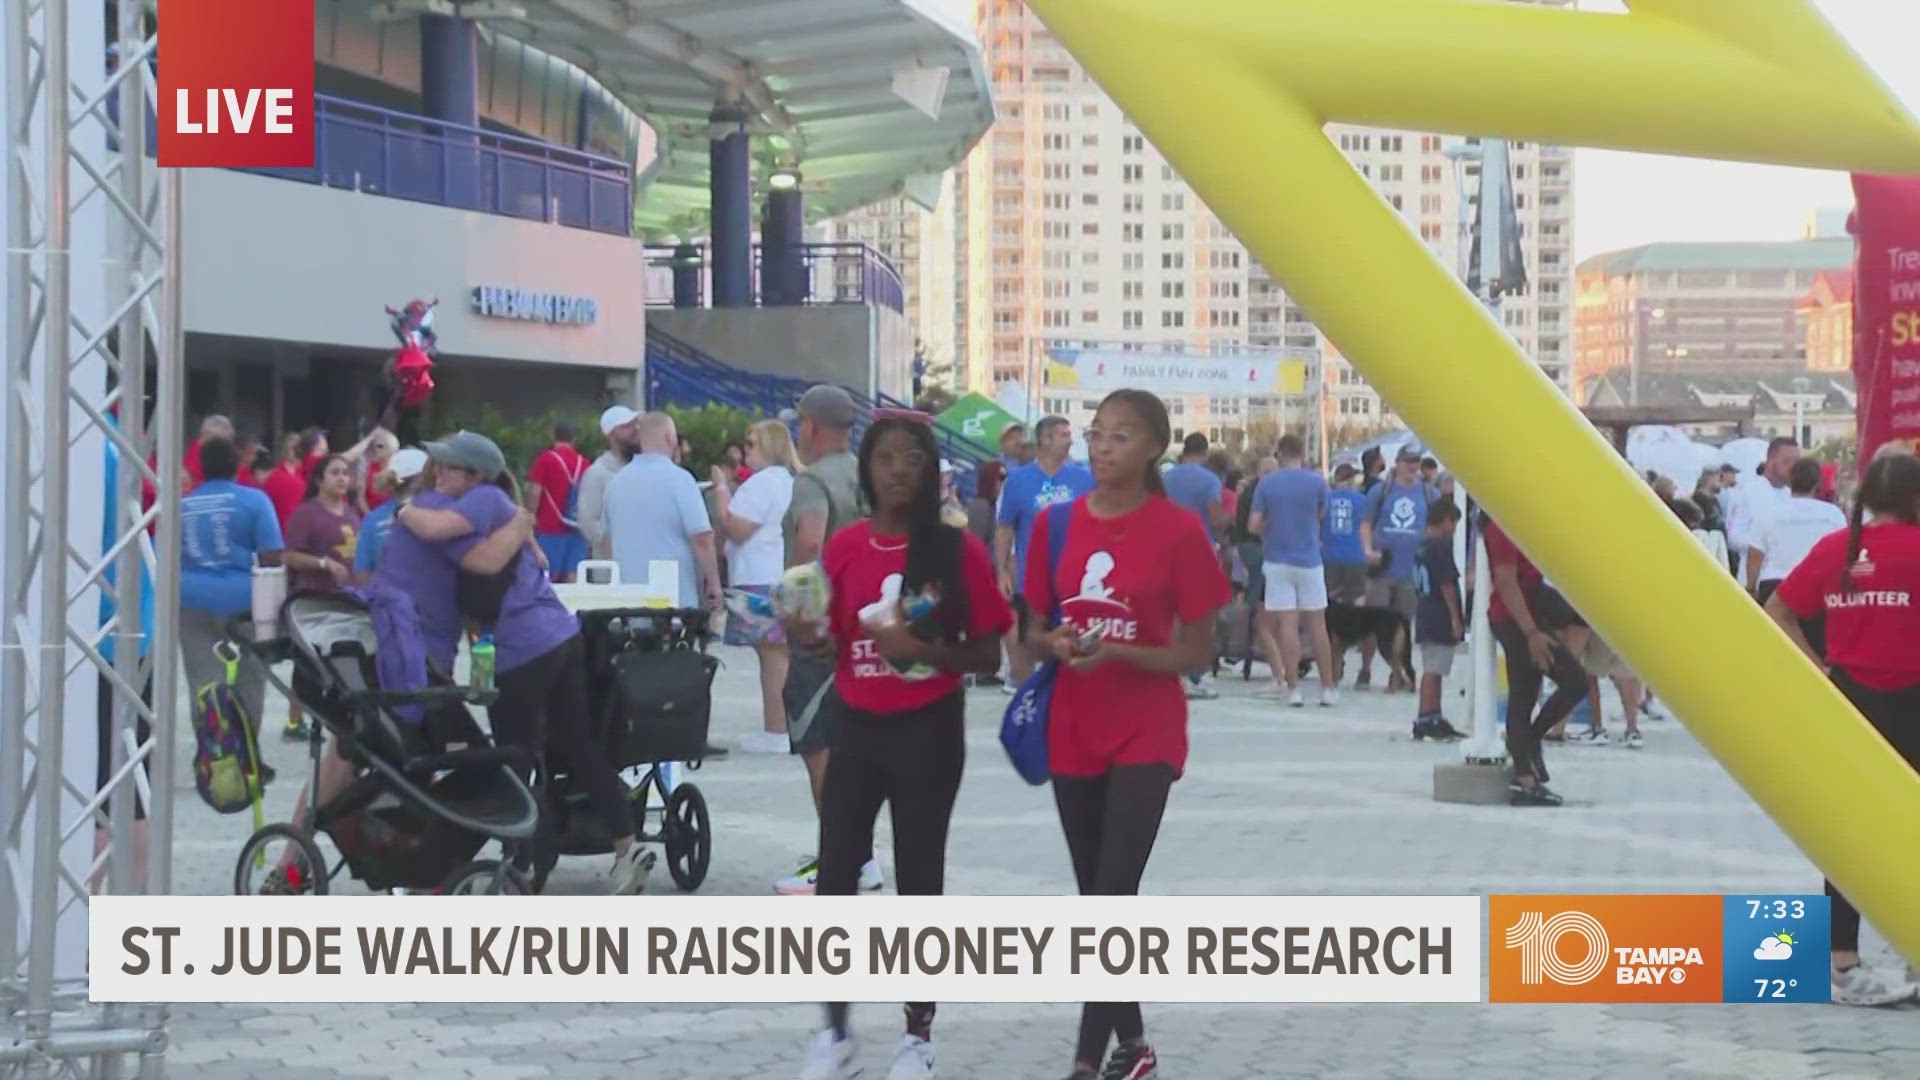 Families shared emotional stories at the organization's walk/run in Tampa, which raised money for childhood cancer research.